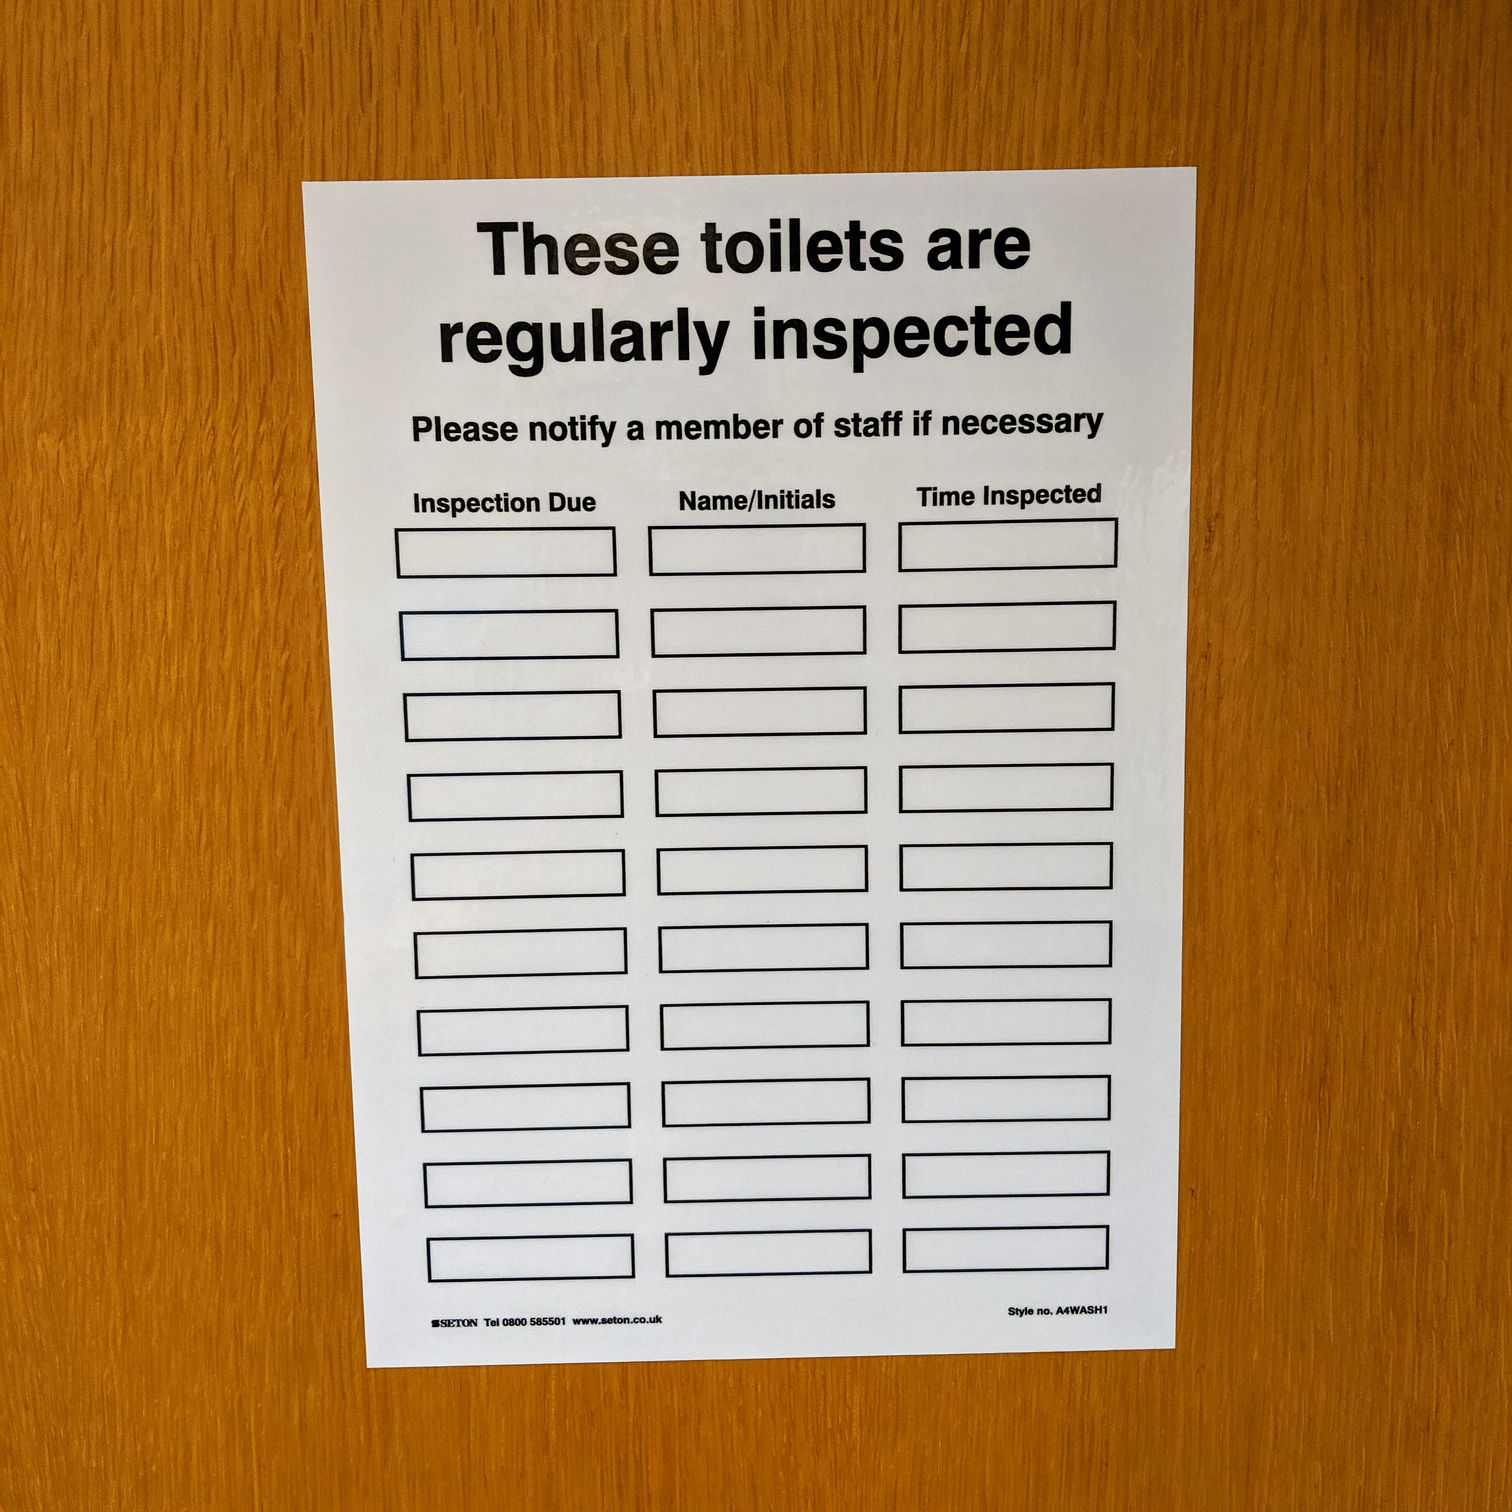 Sign on a toilet door saying "These toilets are regularly inspected"